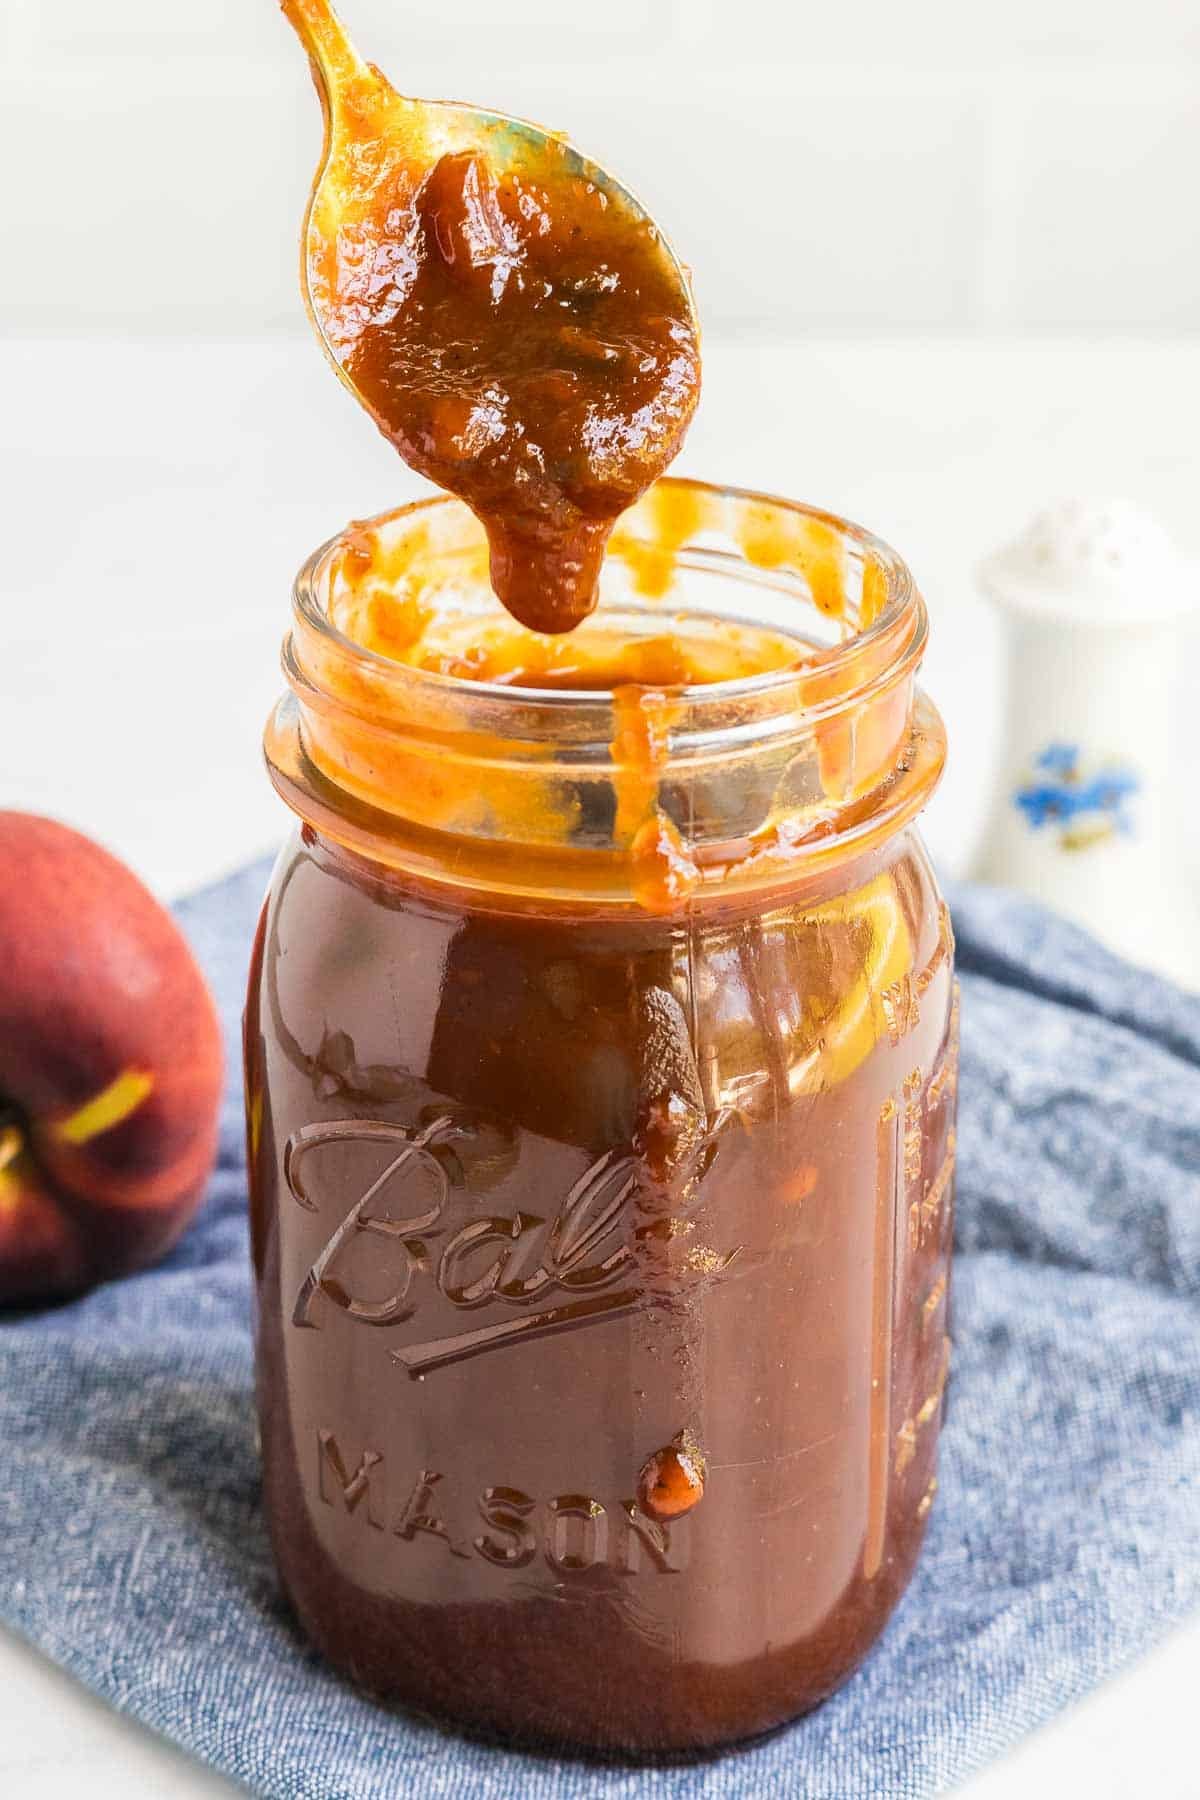 A spoon dipped in dark peach BBQ sauce hovers over a mason jar filled with the same sauce. A fresh peach is partially visible in the background.